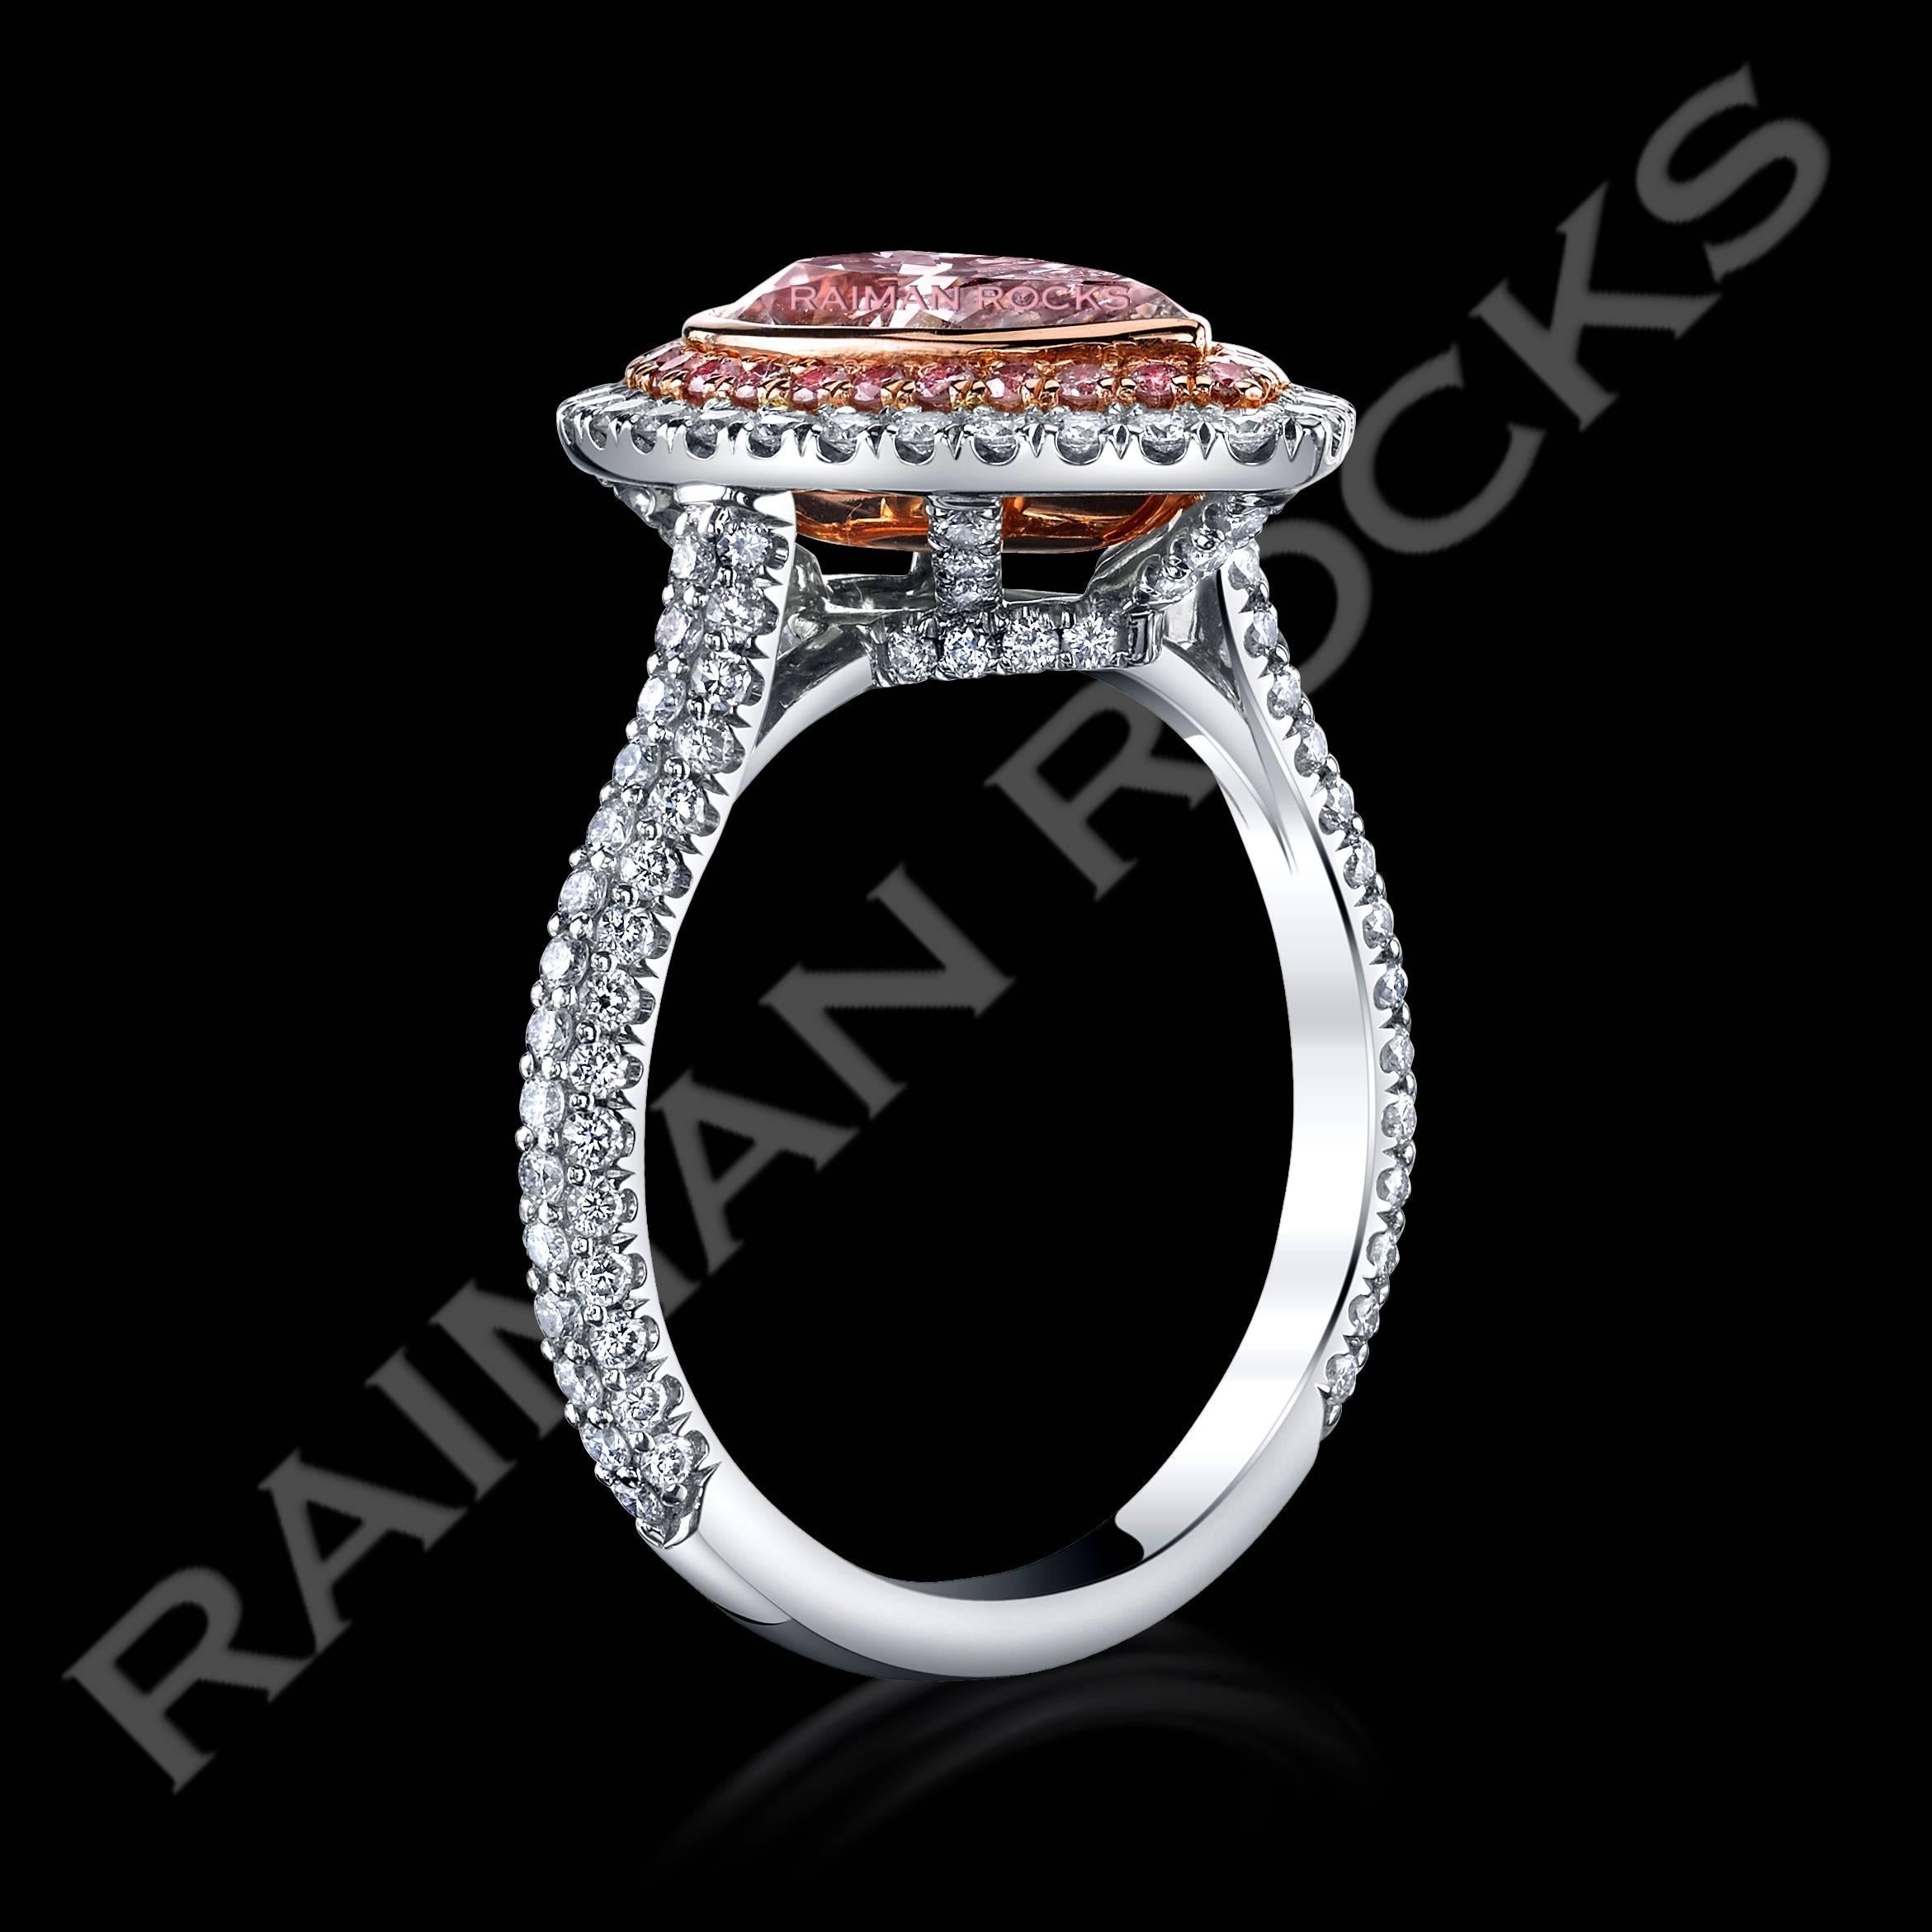 A magnificent Pink Diamond ring exhibiting a 2.18ct pear cut center Pink diamond set in a rose gold box to enhance its beauty and color. The Pink center stone is surrounded by a halo of Natural Fancy Pink diamonds melee enhancing the center stone's